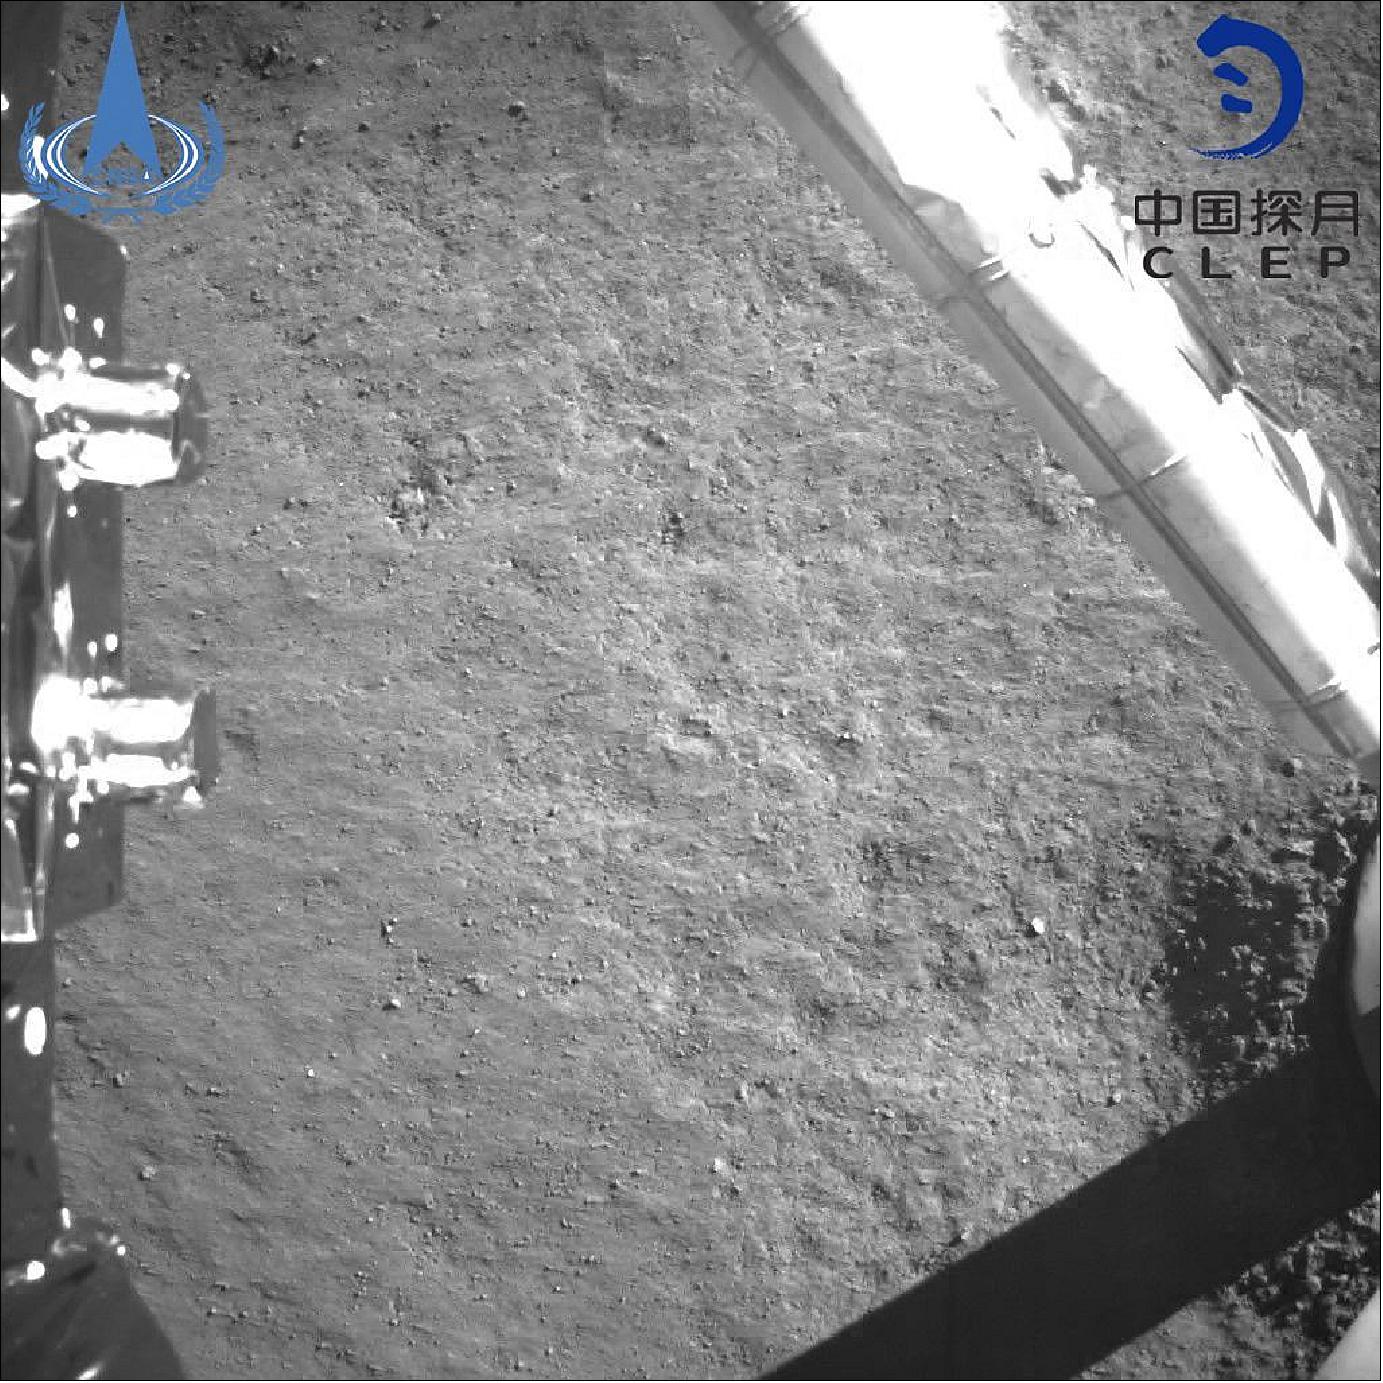 Figure 30: A view of the surface of Von Kármán crater from the Chang’e-4 lander descent camera (image credit: CNSA/CLEP)